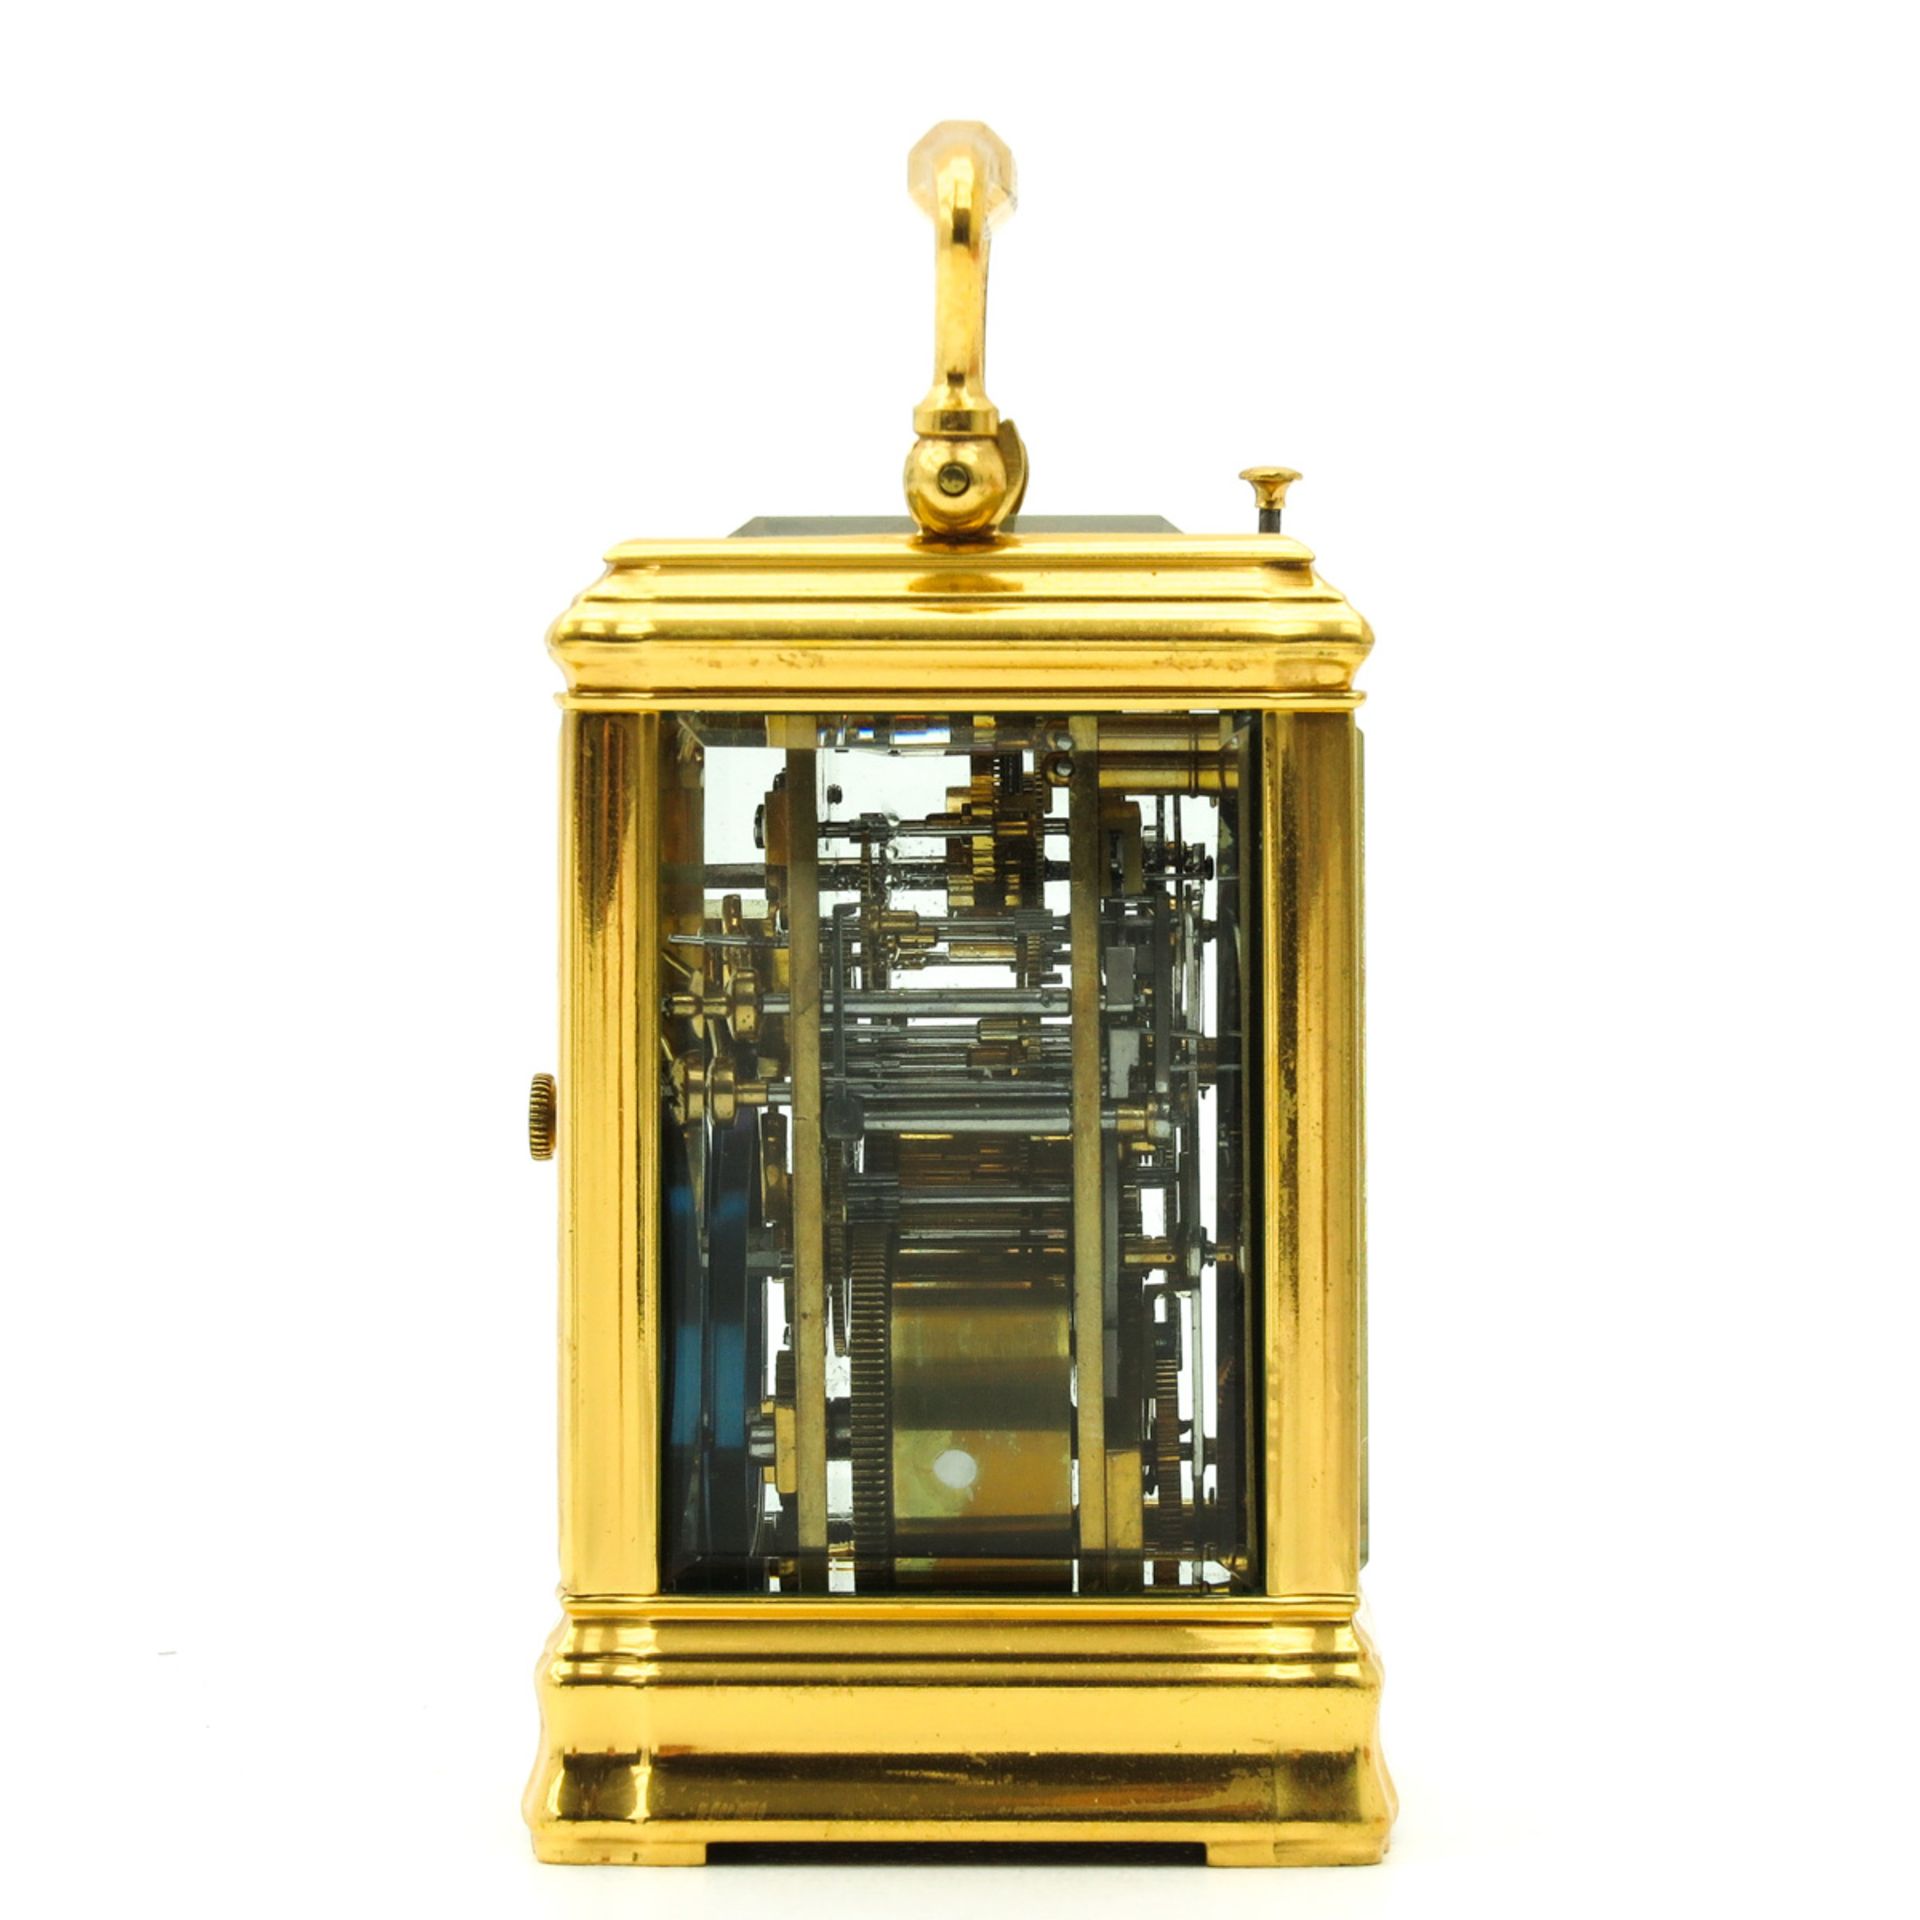 Carriage Clock - Image 4 of 5